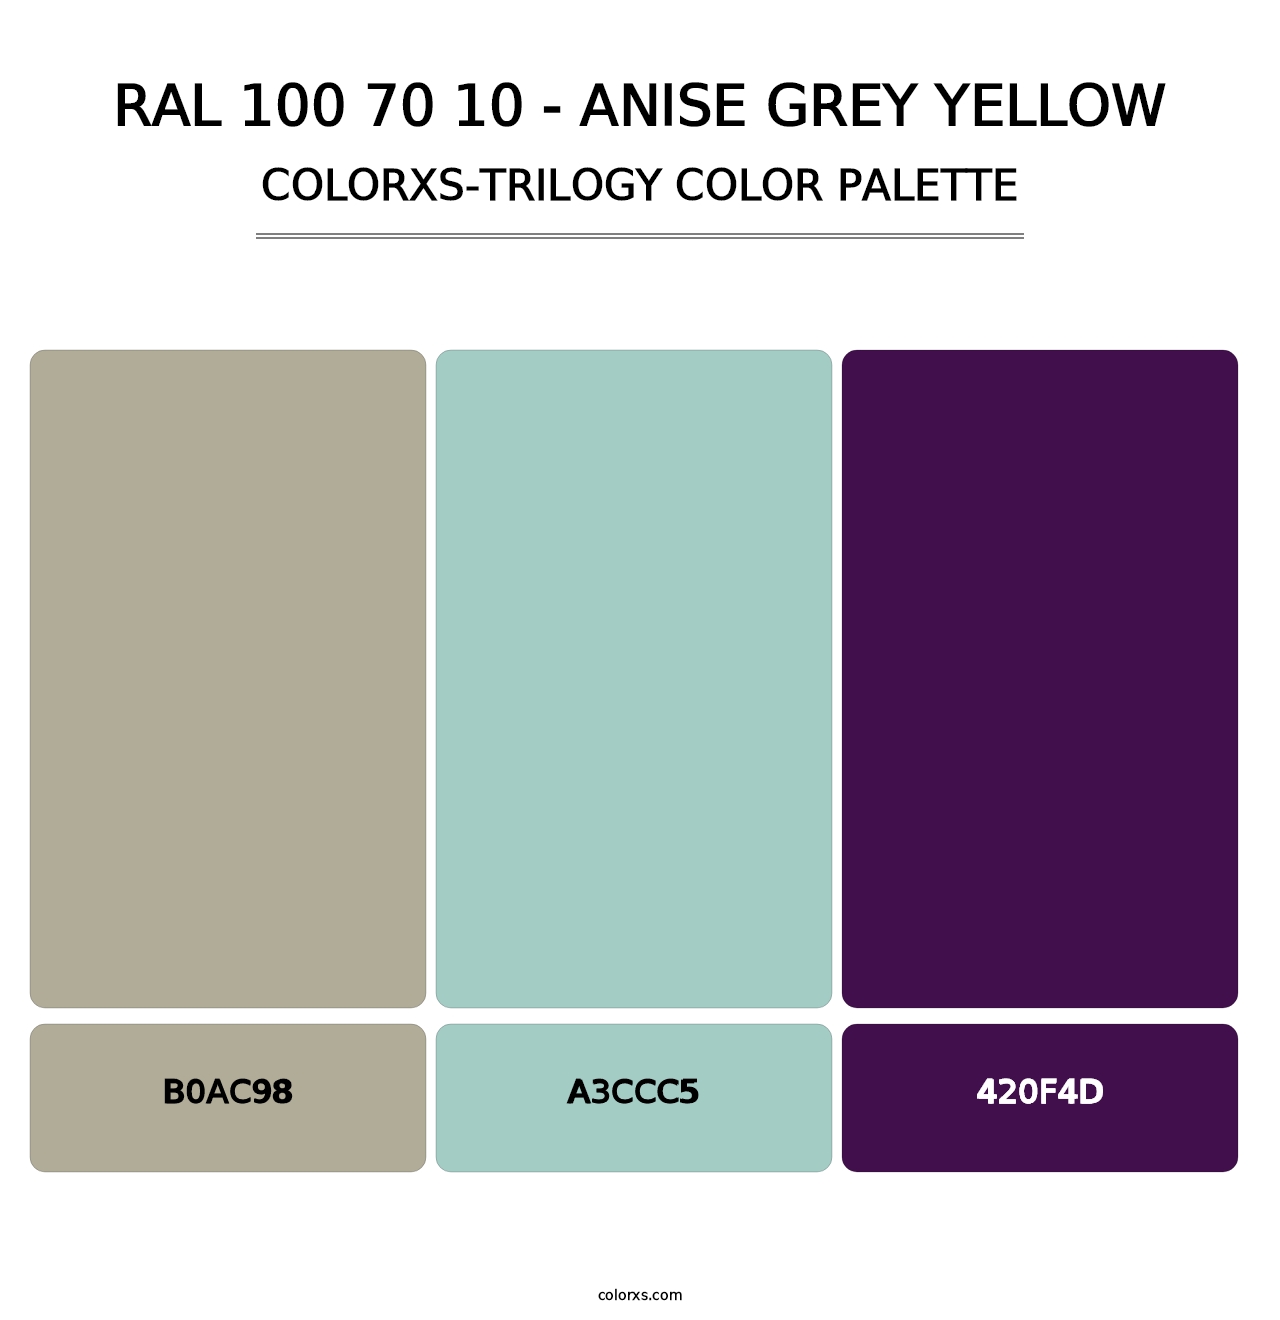 RAL 100 70 10 - Anise Grey Yellow - Colorxs Trilogy Palette